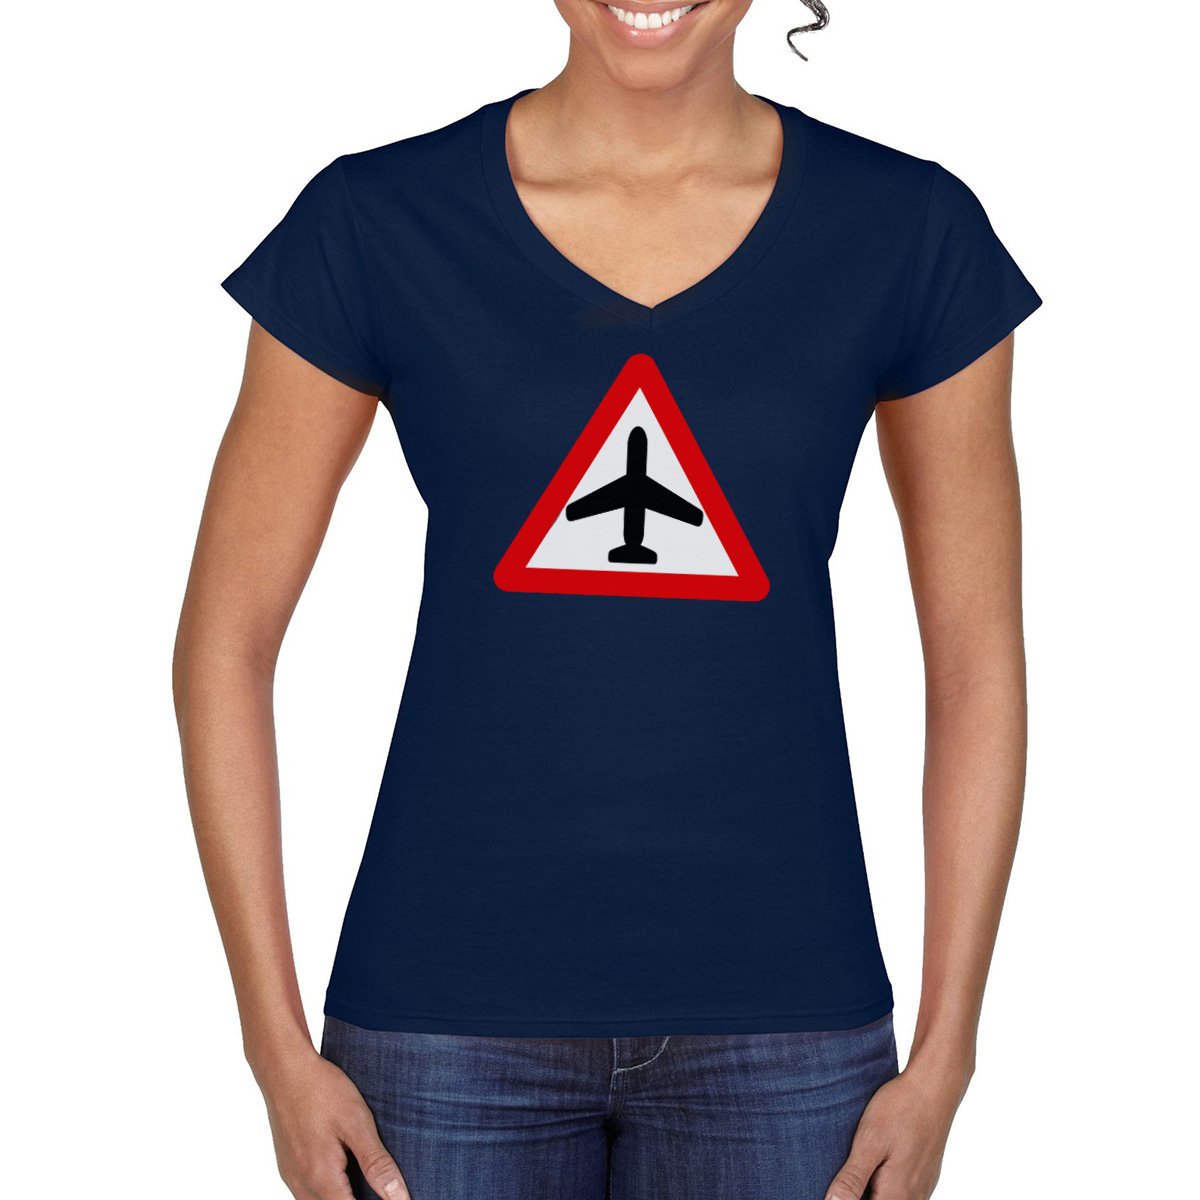 CAUTION AIRCRAFT Semi-Fitted Women's V-Neck T-Shirt